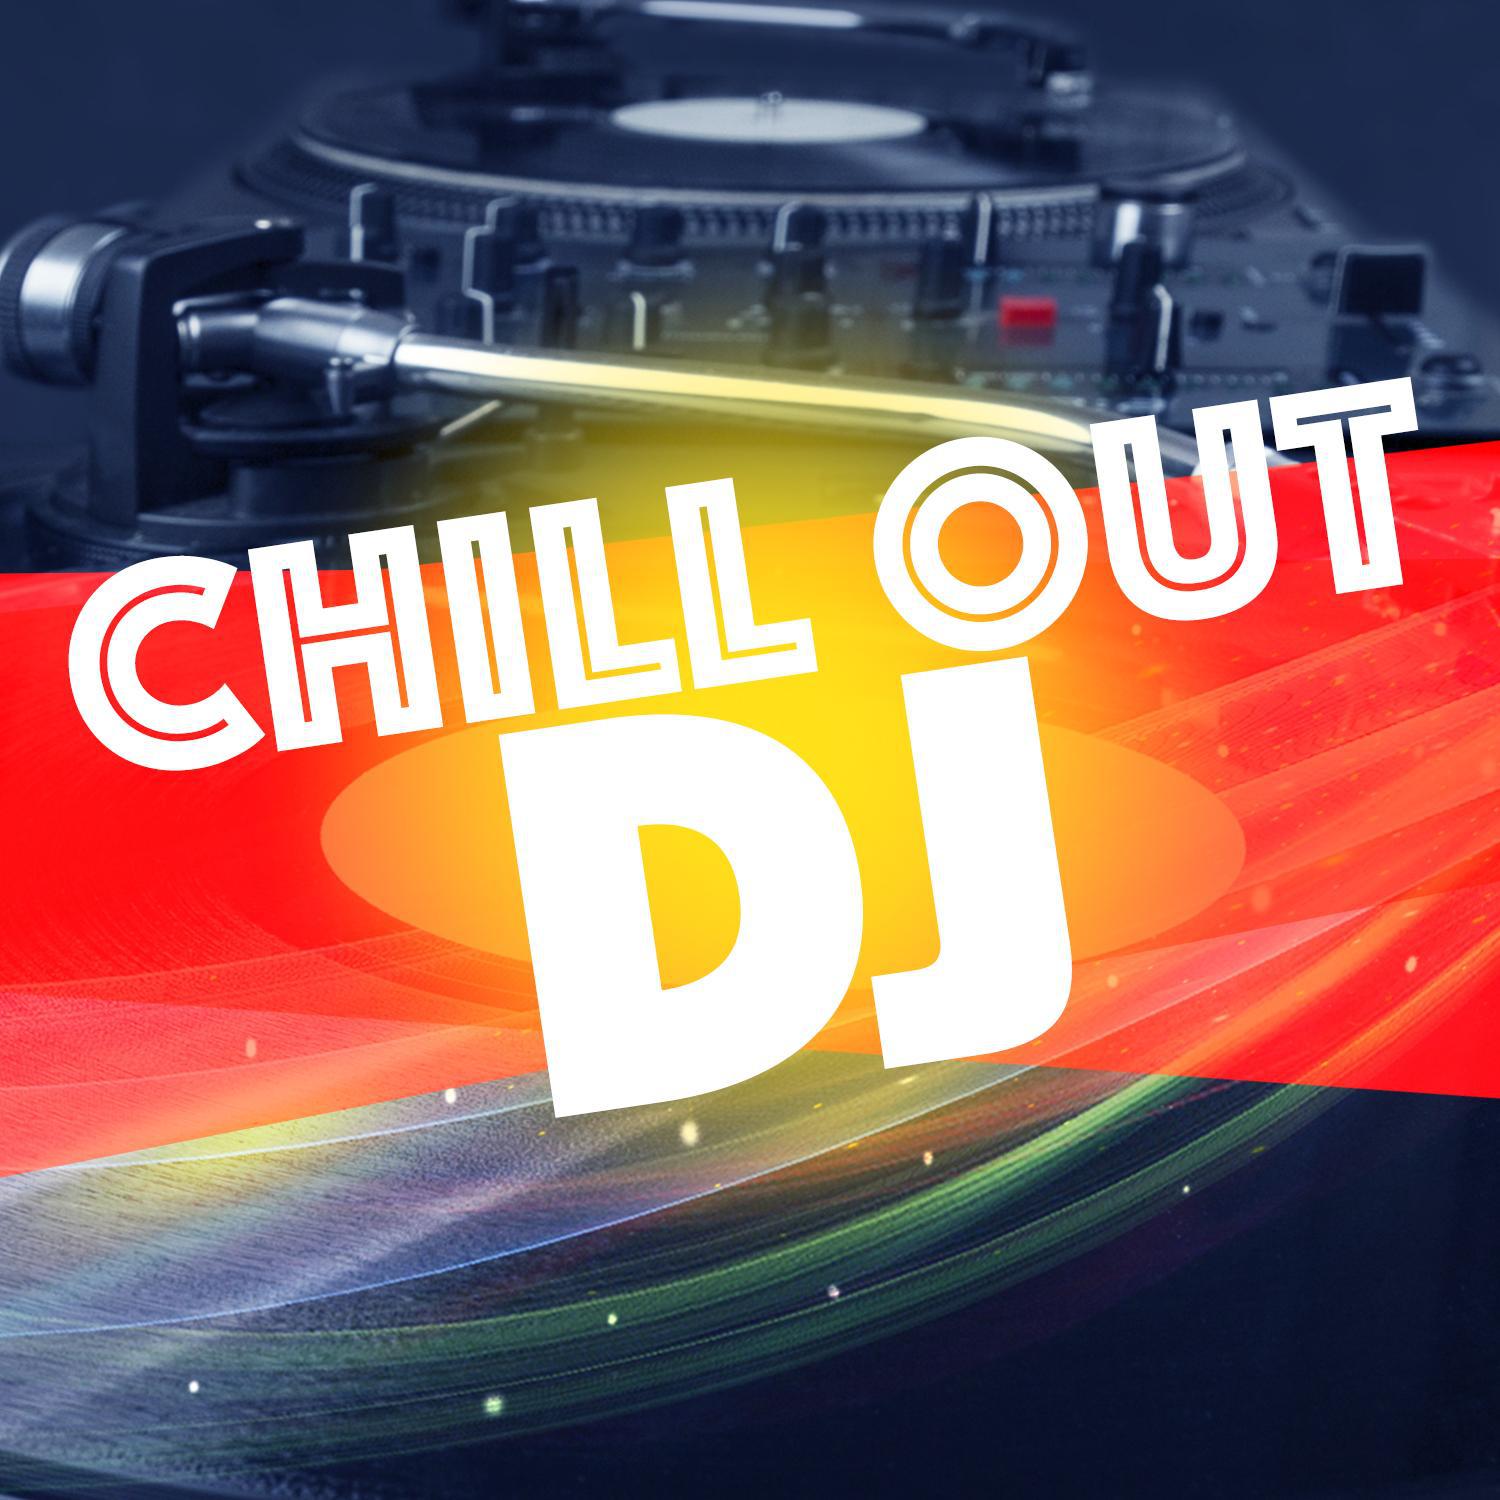 Chill out DJ